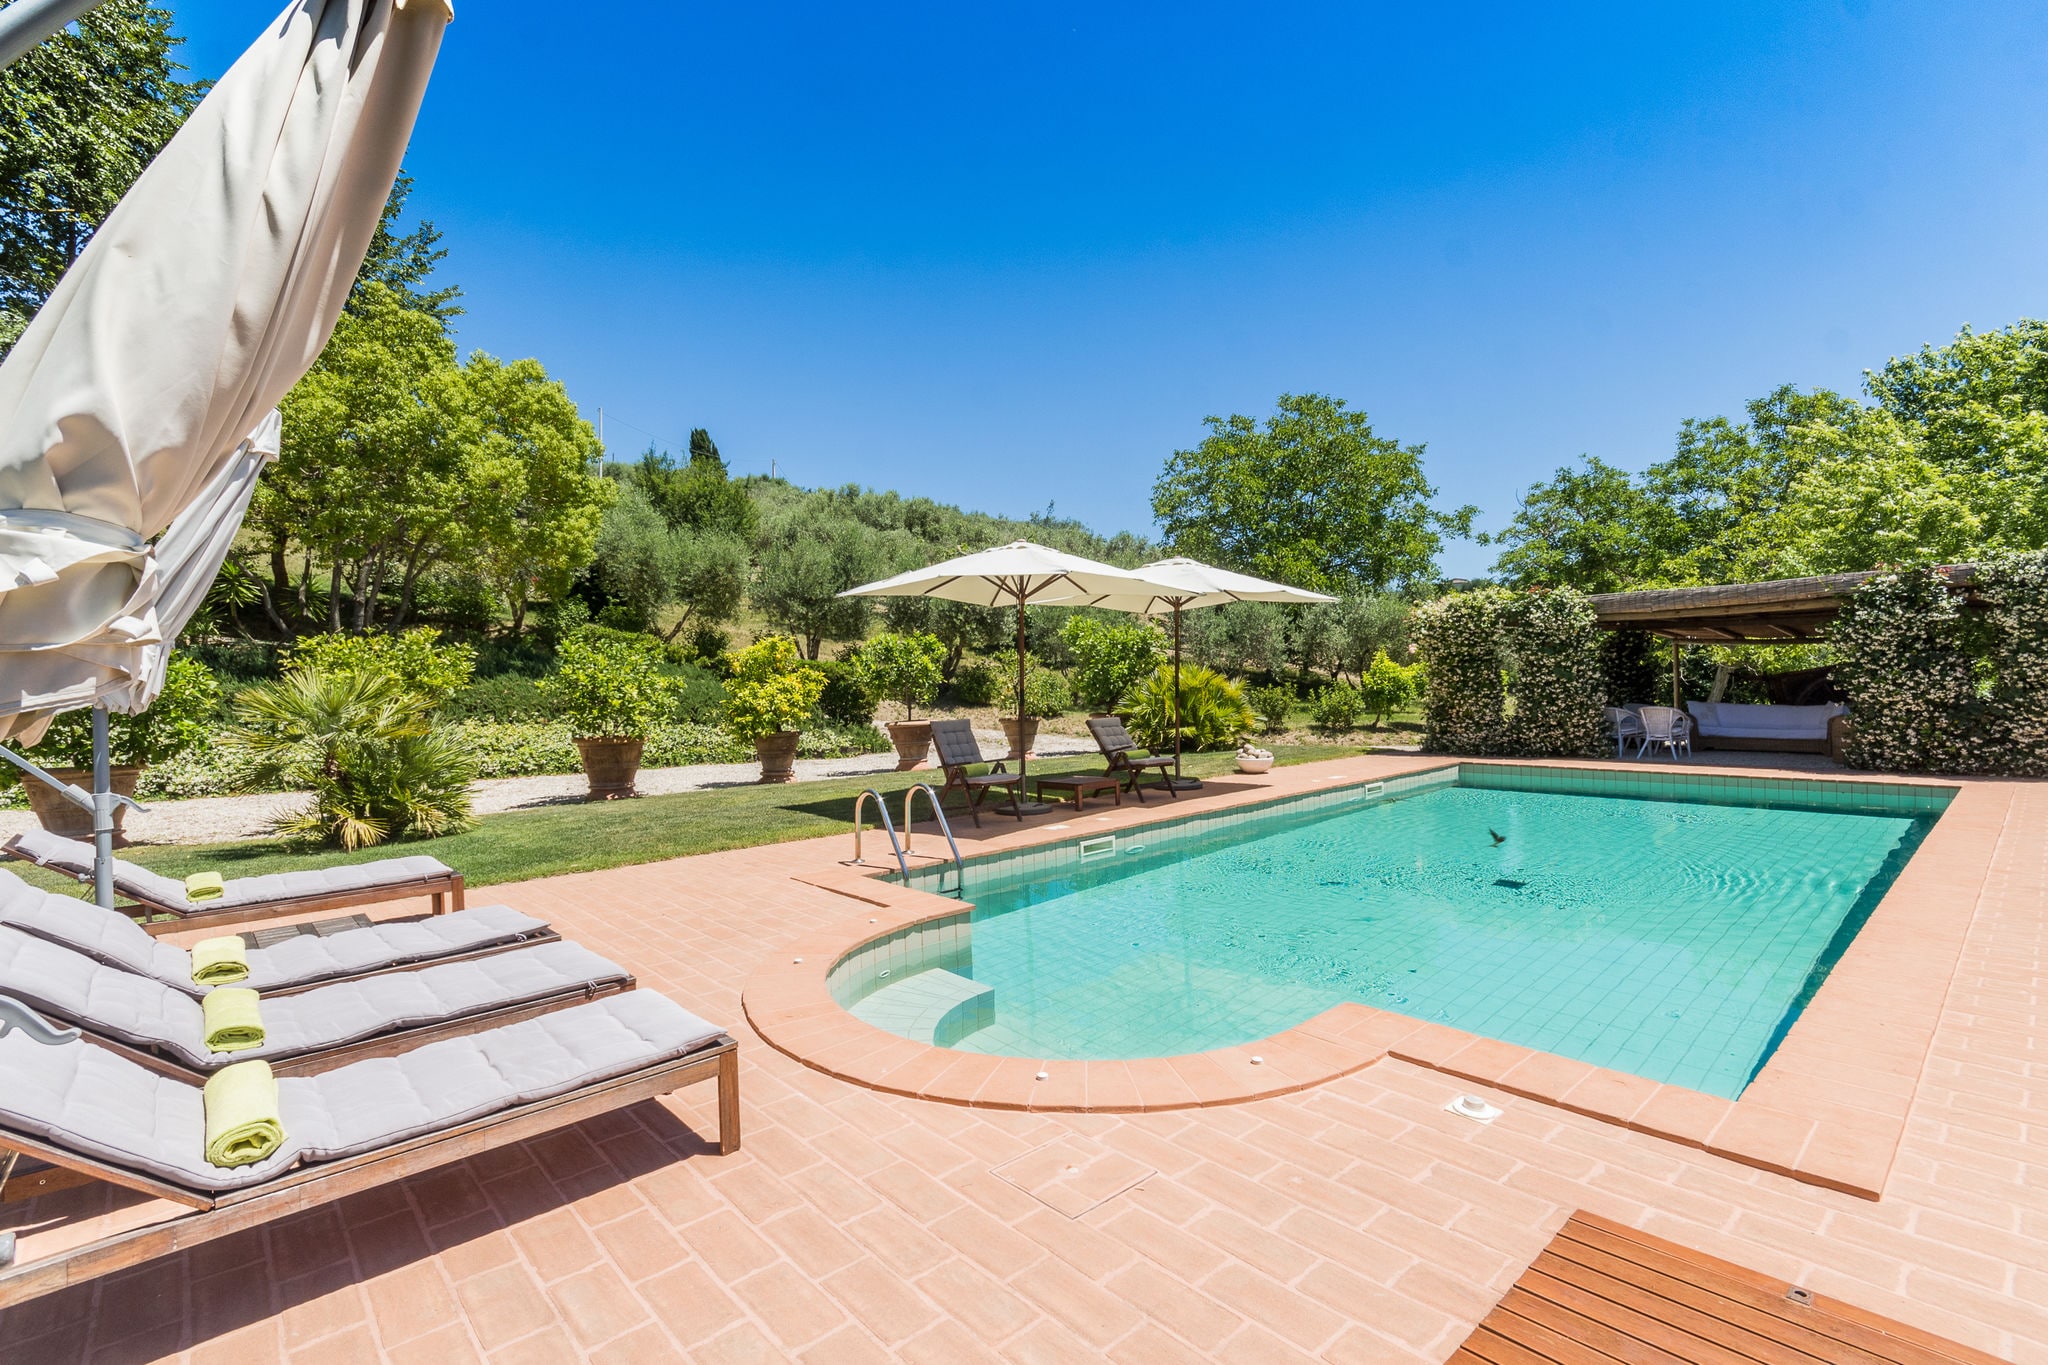 Beautiful villa with a private swimming pool in hilly surroundings